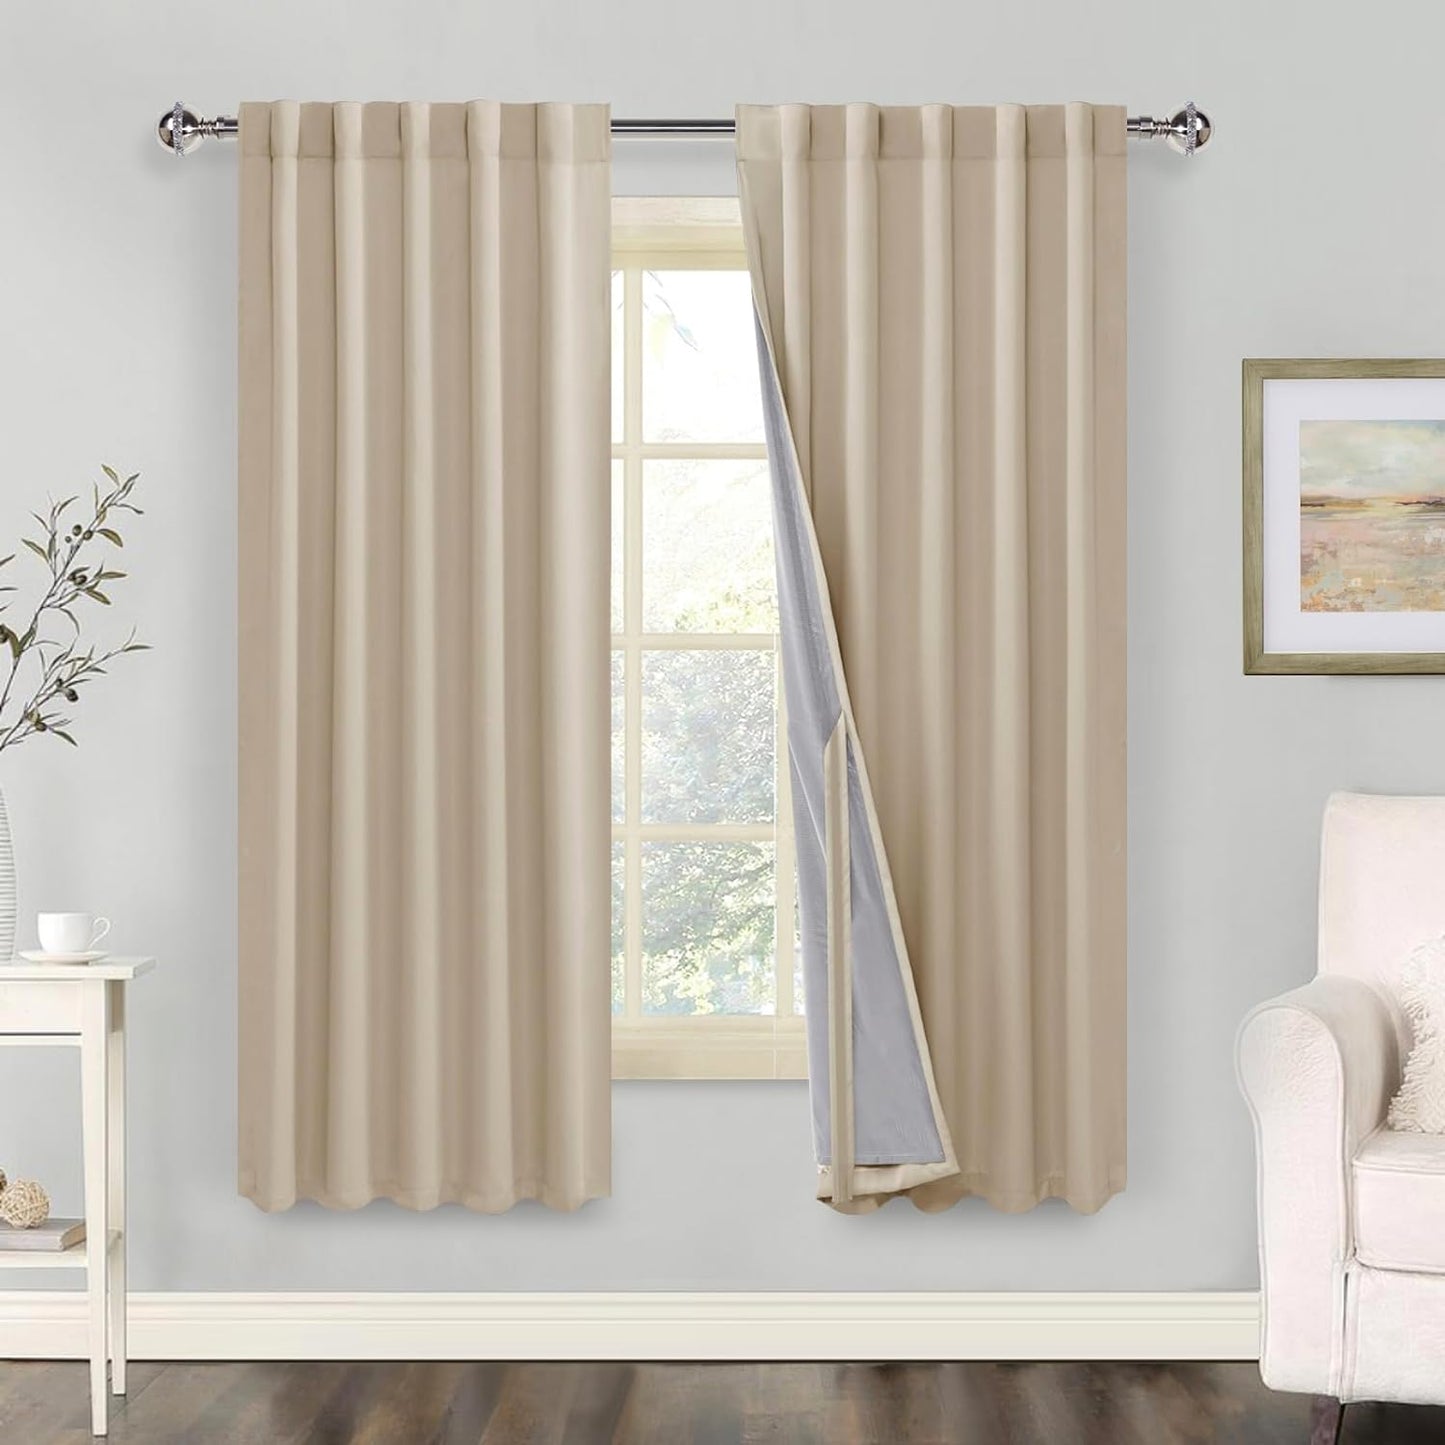 100% Blackout Curtains 2 Panels with Tiebacks- Heat and Full Light Blocking Window Treatment with Black Liner for Bedroom/Nursery, Rod Pocket & Back Tab，White, W52 X L84 Inches Long, Set of 2  XWZO Beige W42" X L63"|2 Panels 